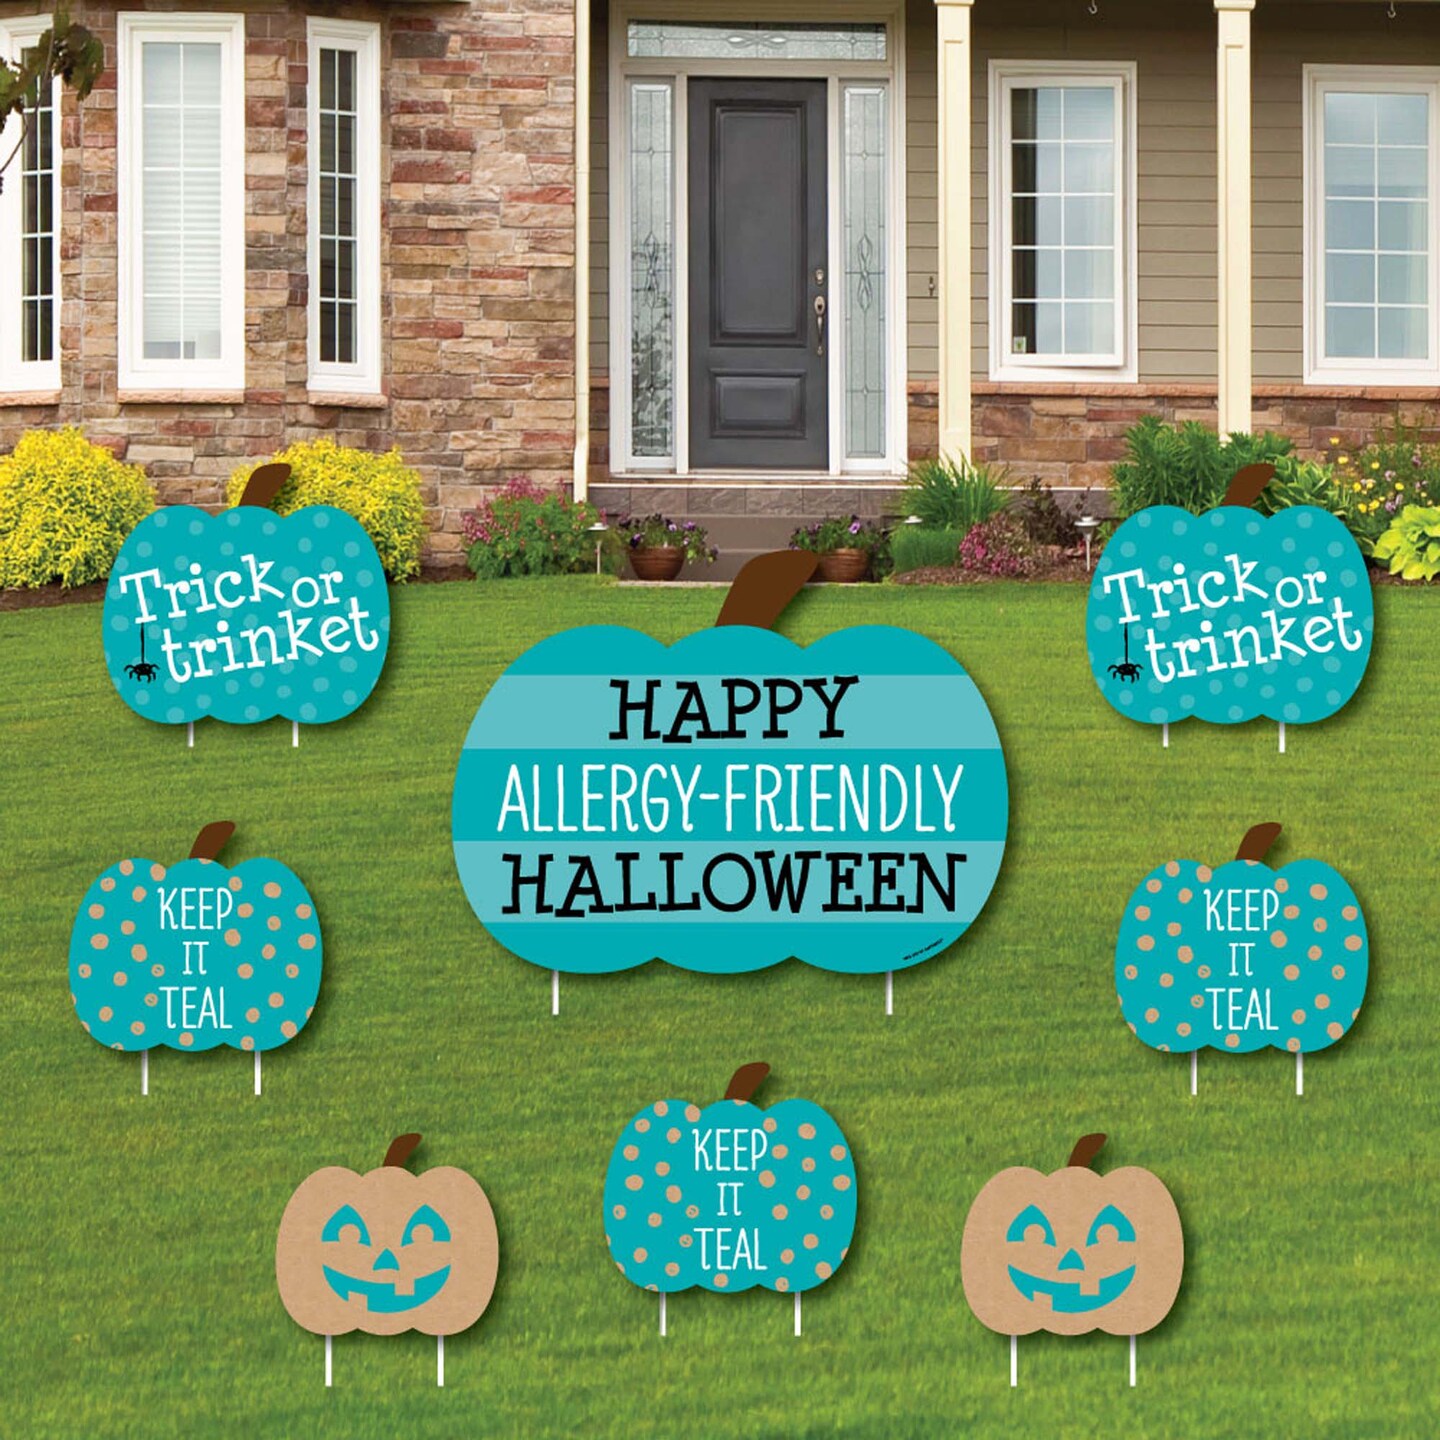 Big Dot of Happiness Teal Pumpkin - Yard Sign and Outdoor Lawn Decorations - Halloween Allergy Friendly Trick or Trinket Yard Signs - Set of 8